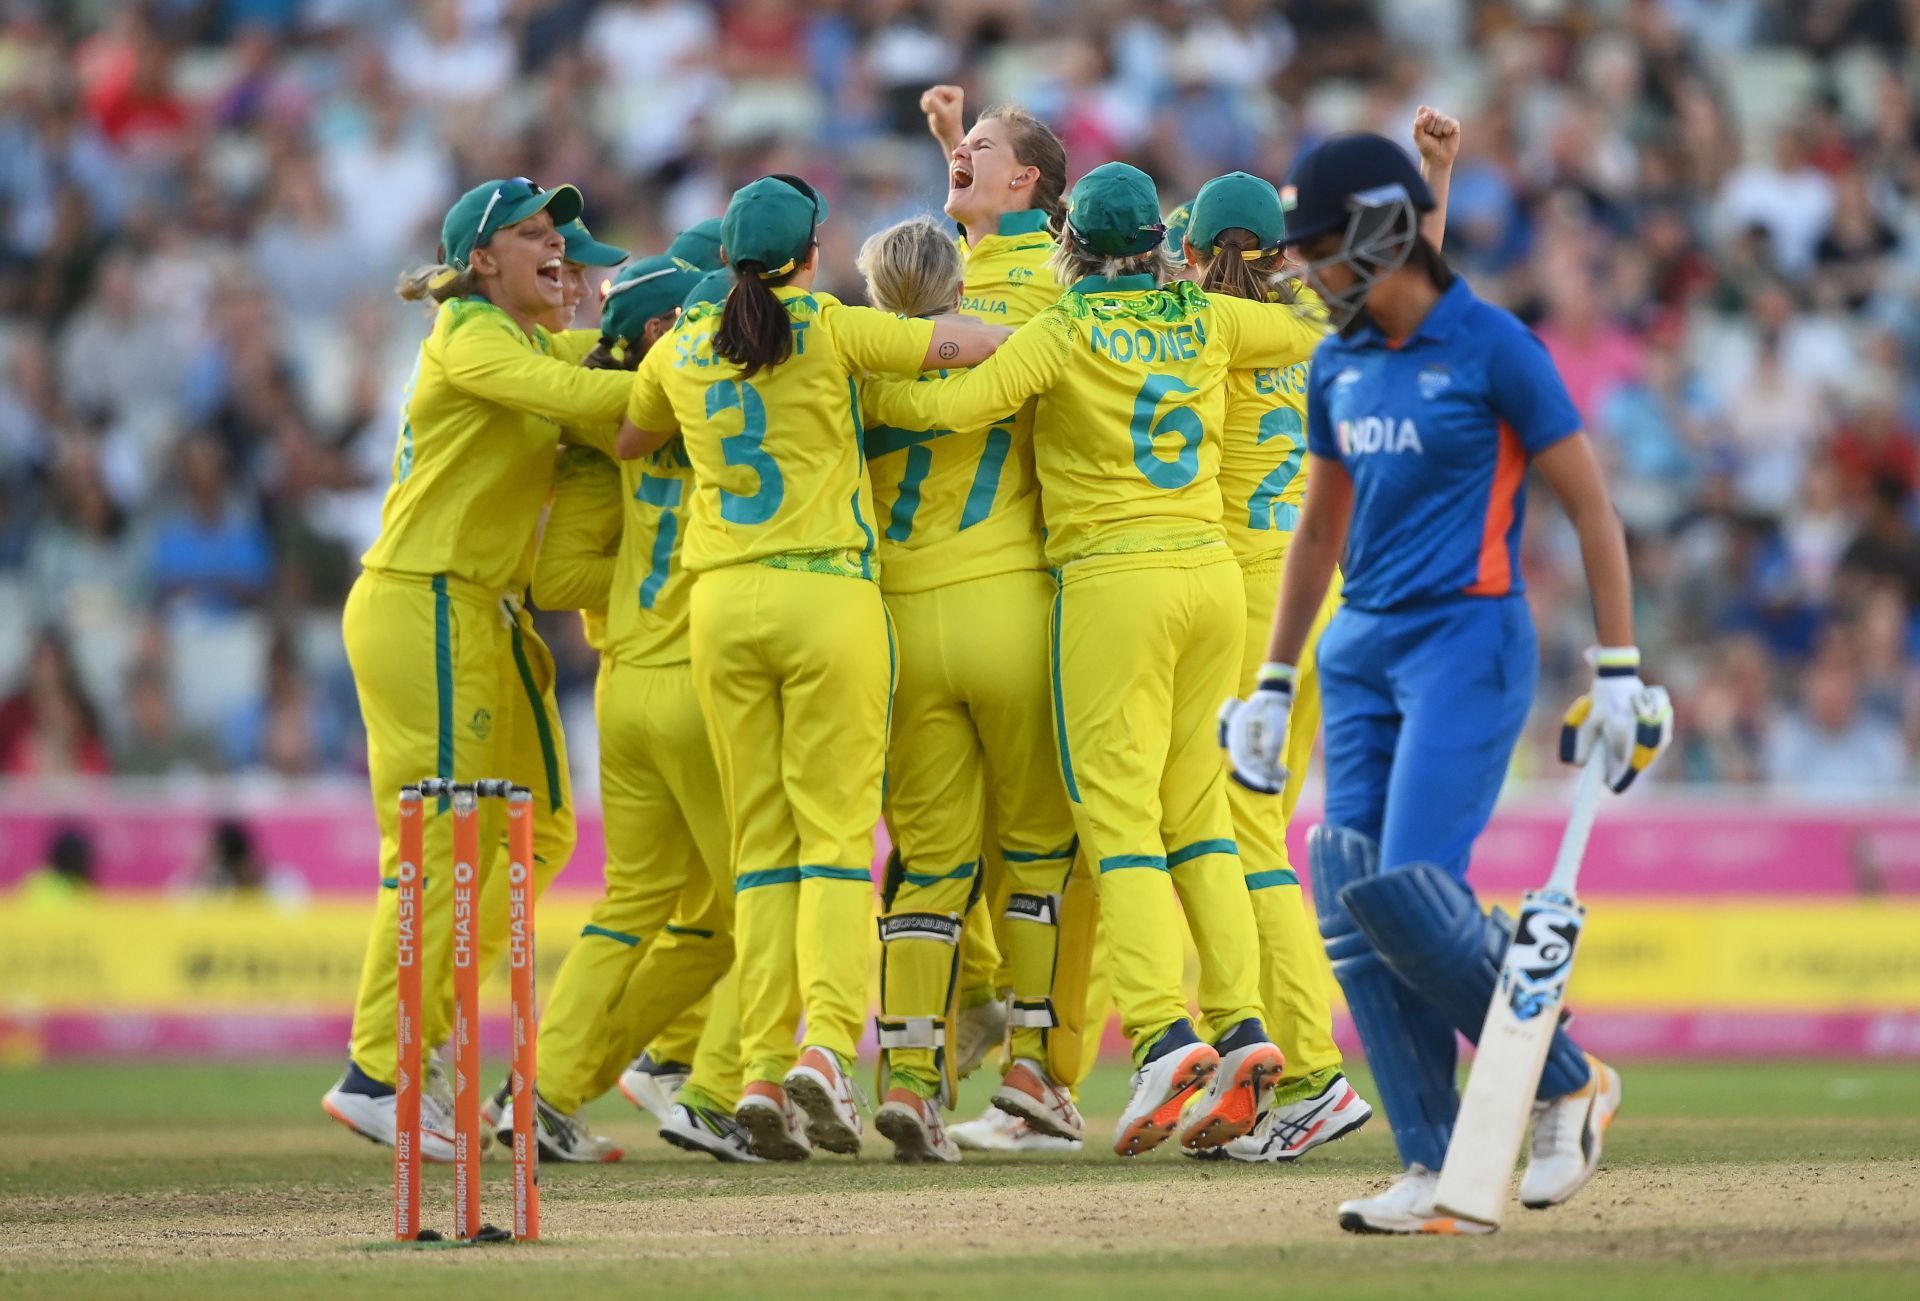 Australia Women clinched gold in cricket in CWG 2022, defeating India Women by 9 runs. Pic: Getty Images